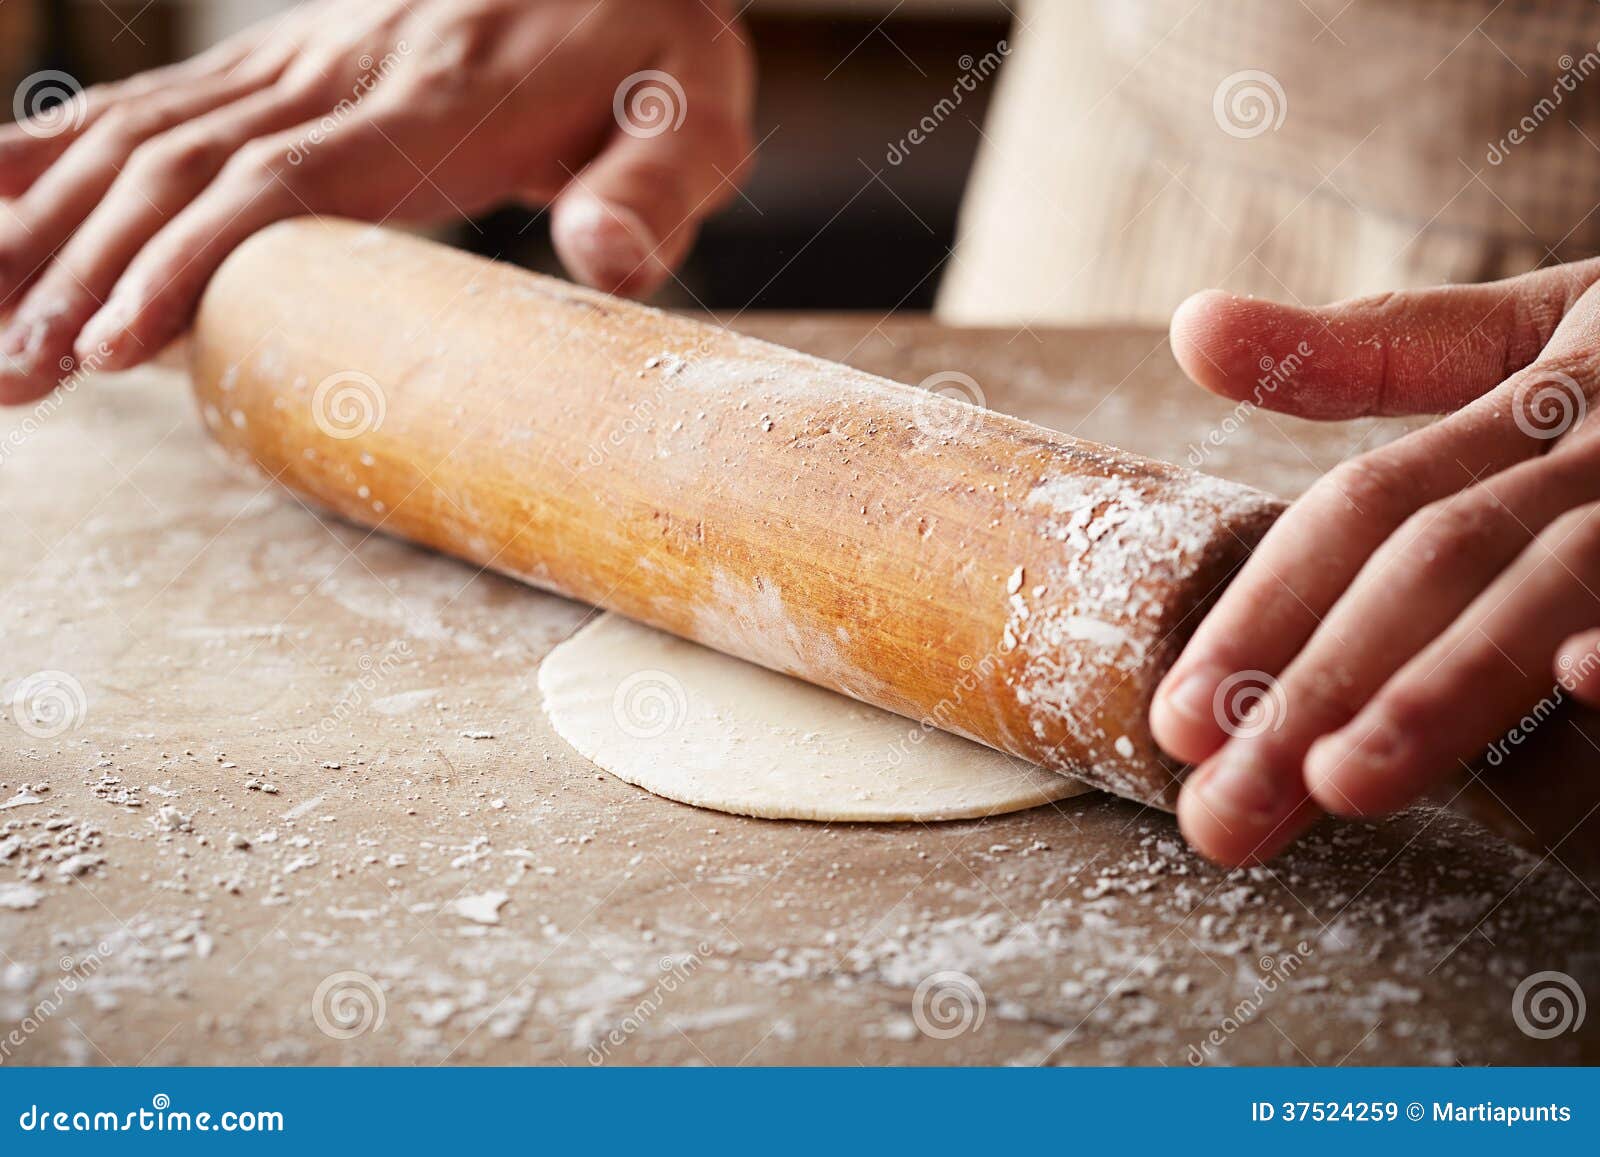 hands baking dough with rolling pin